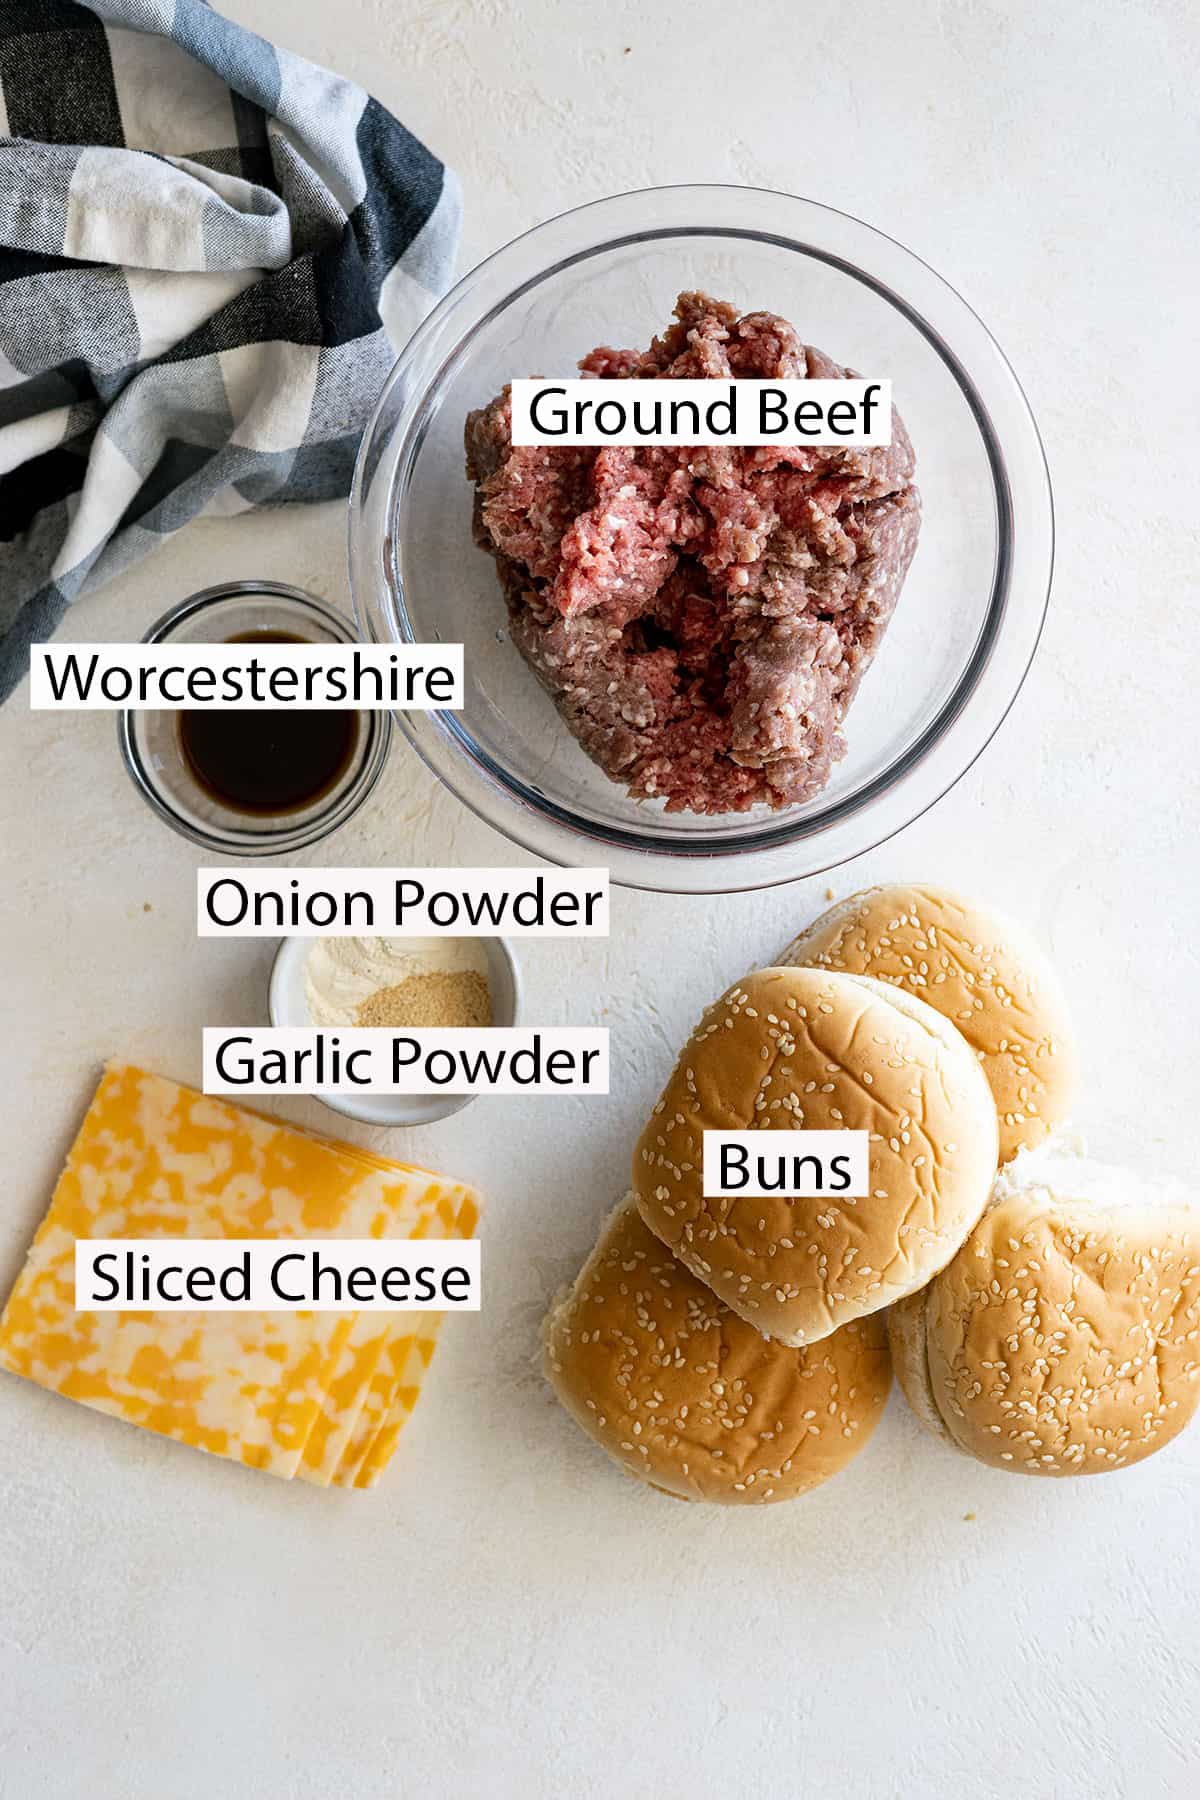 Burger ingredients: ground beef, buns, and optional garlic powder, onion powder, worcestershire, and sliced cheese. 